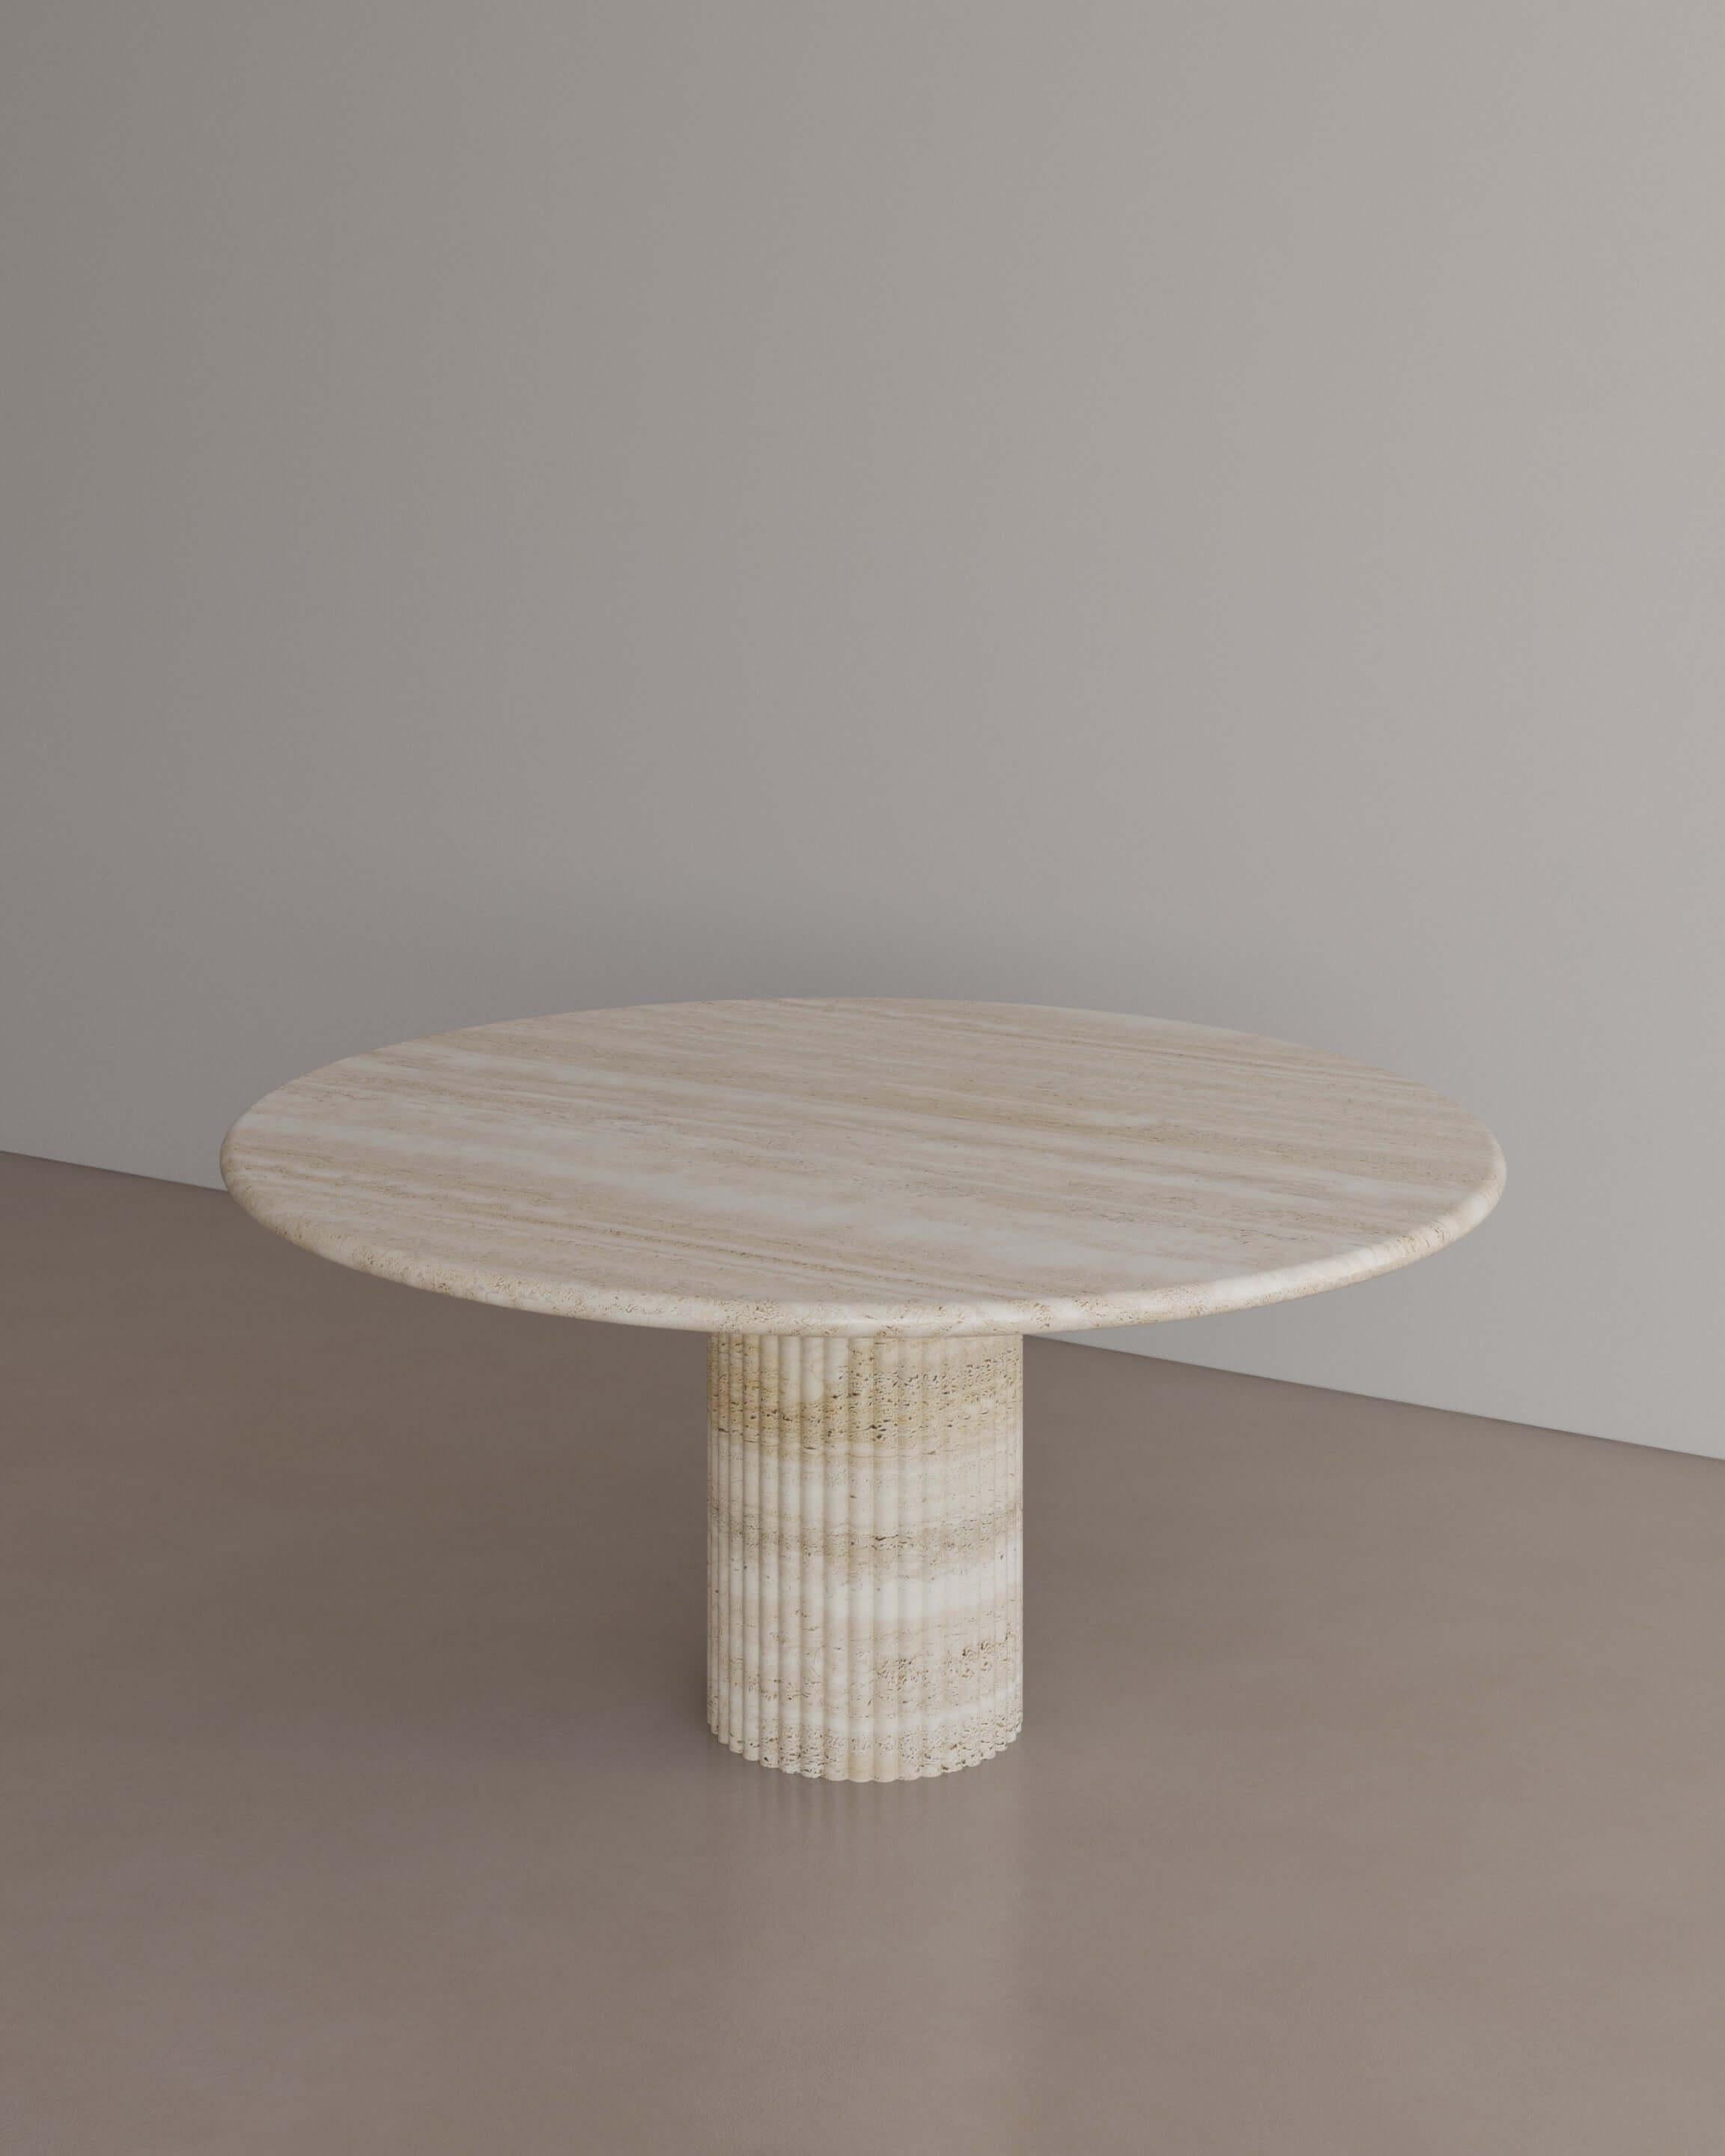 The Essentialist brings you The Antica Dining Table I in Nude Travertine. An oval table top resolved by smooth bullnose edges rests on two supporting pillars. Architectural form is refined by artistic expression echoing Roman culture. This table,